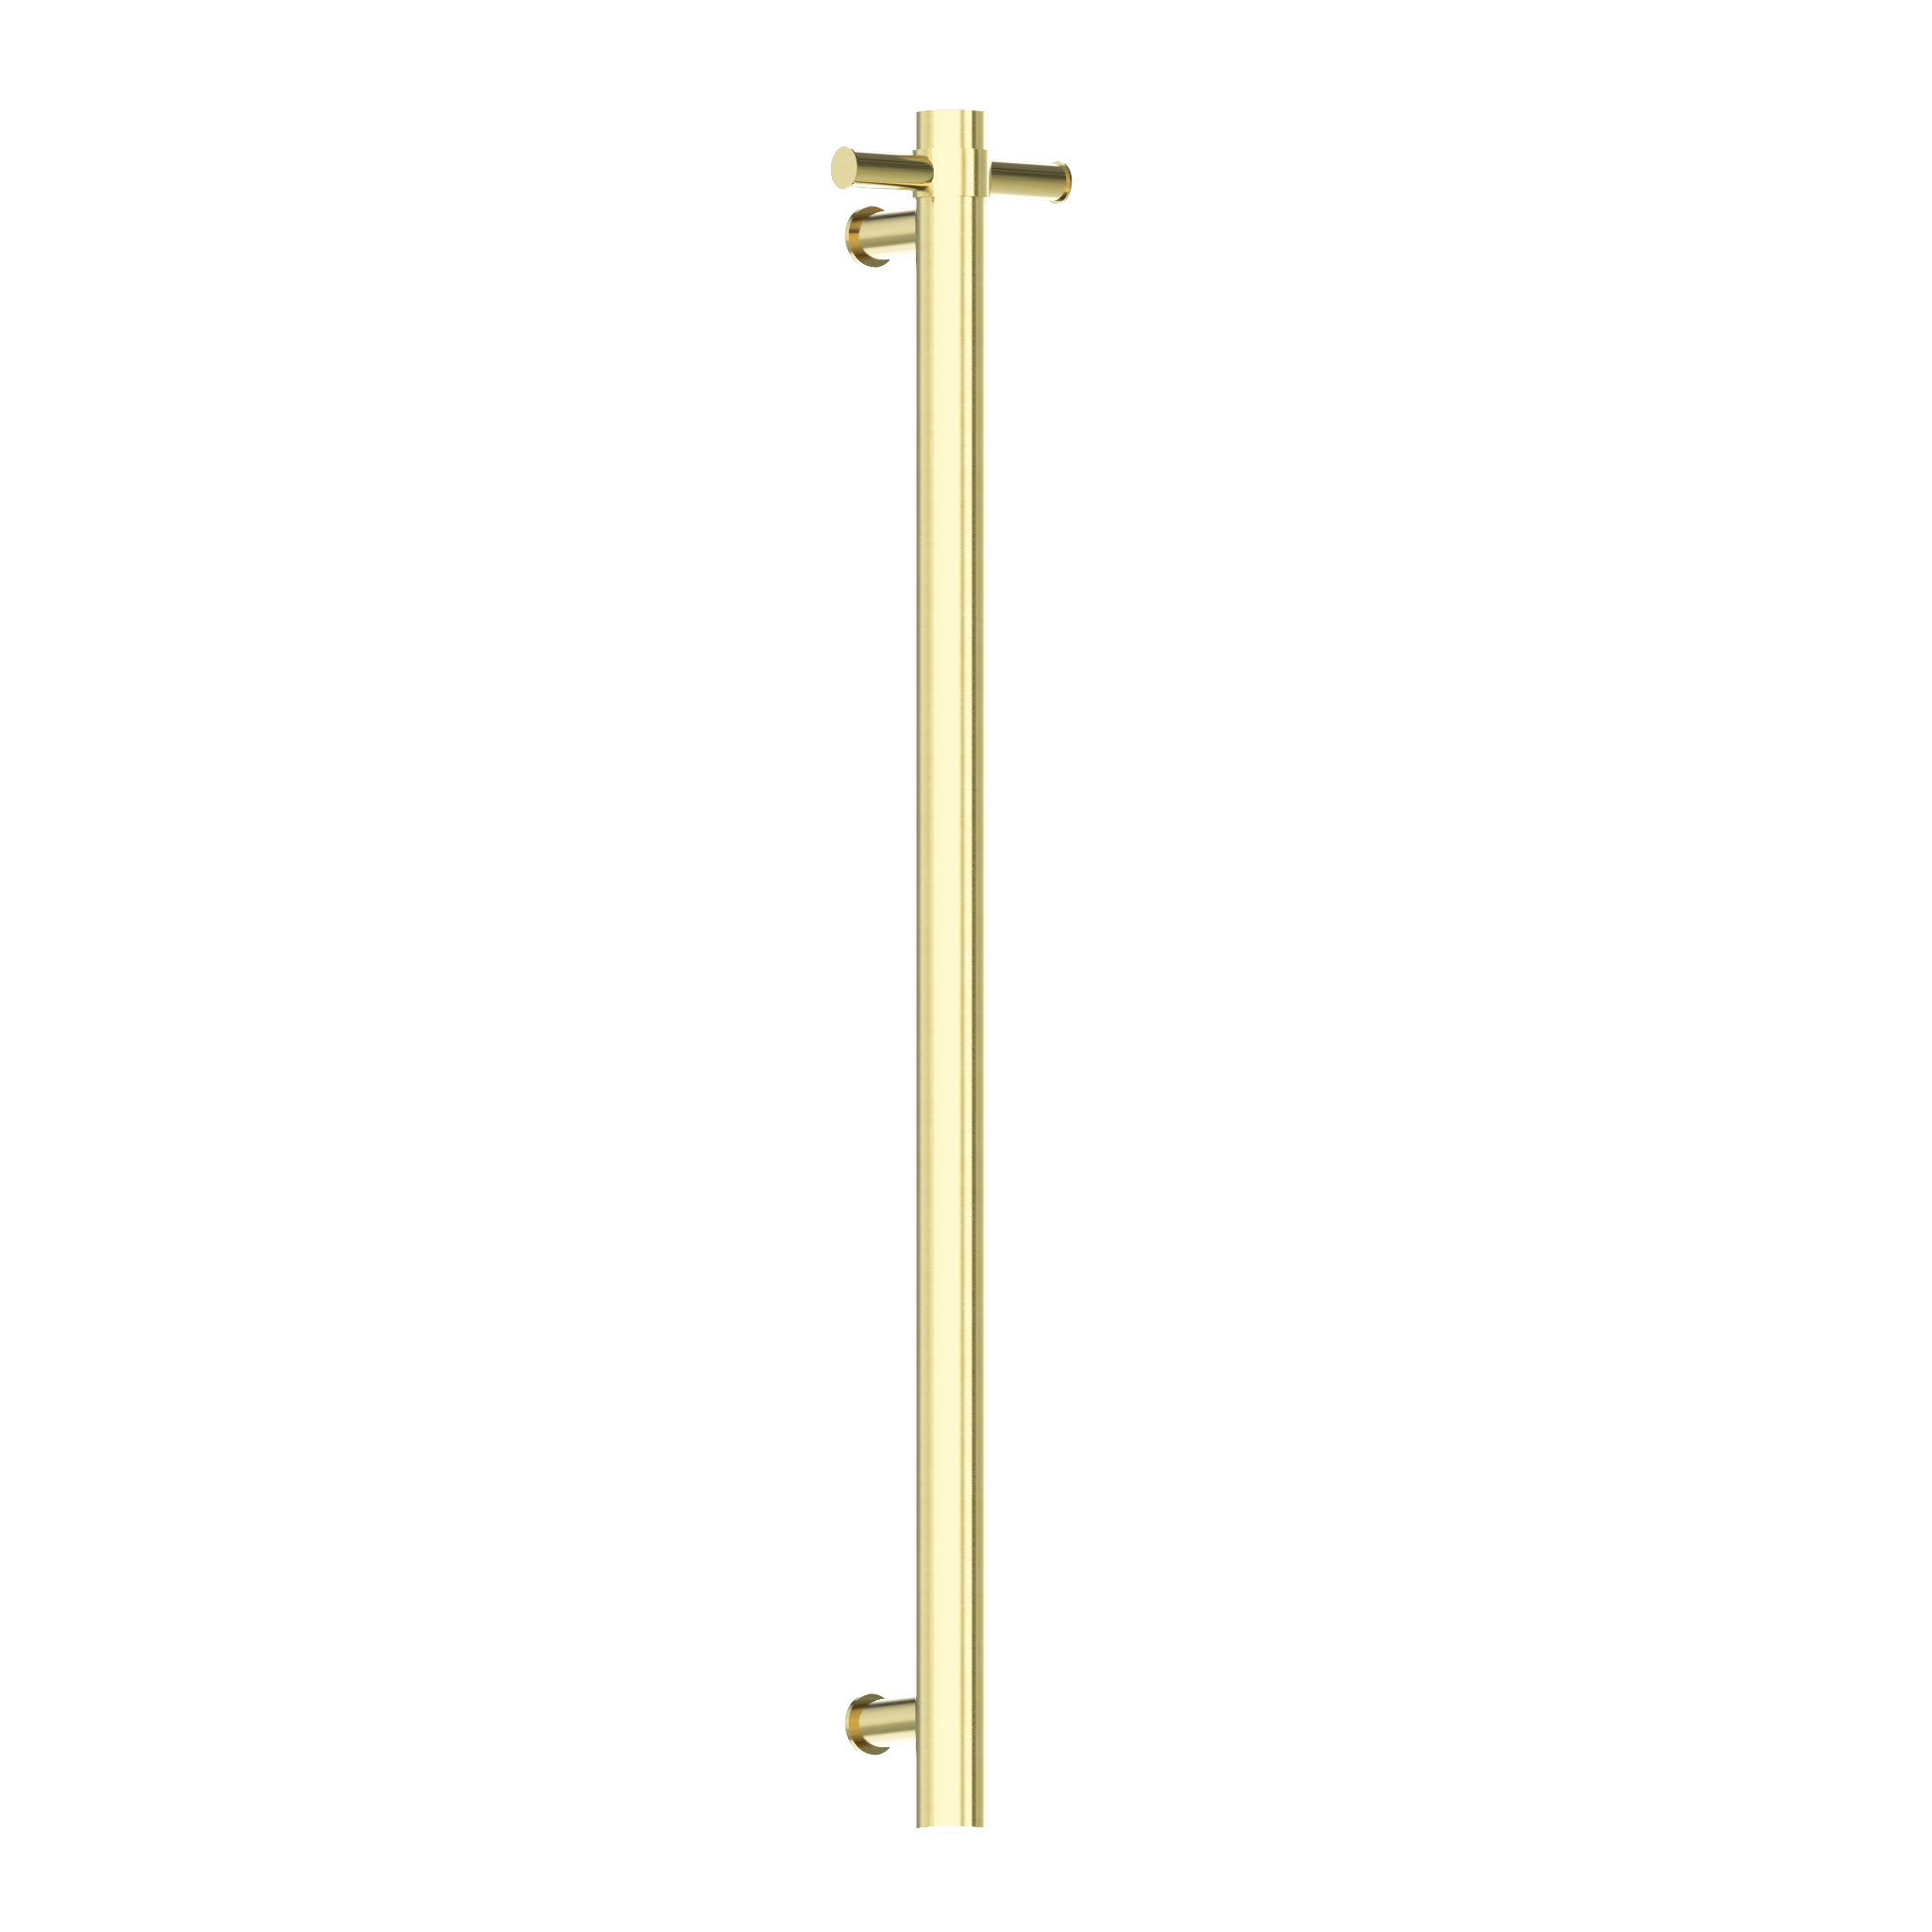 HEATED VERTICAL TOWEL RAIL BRUSHED GOLD